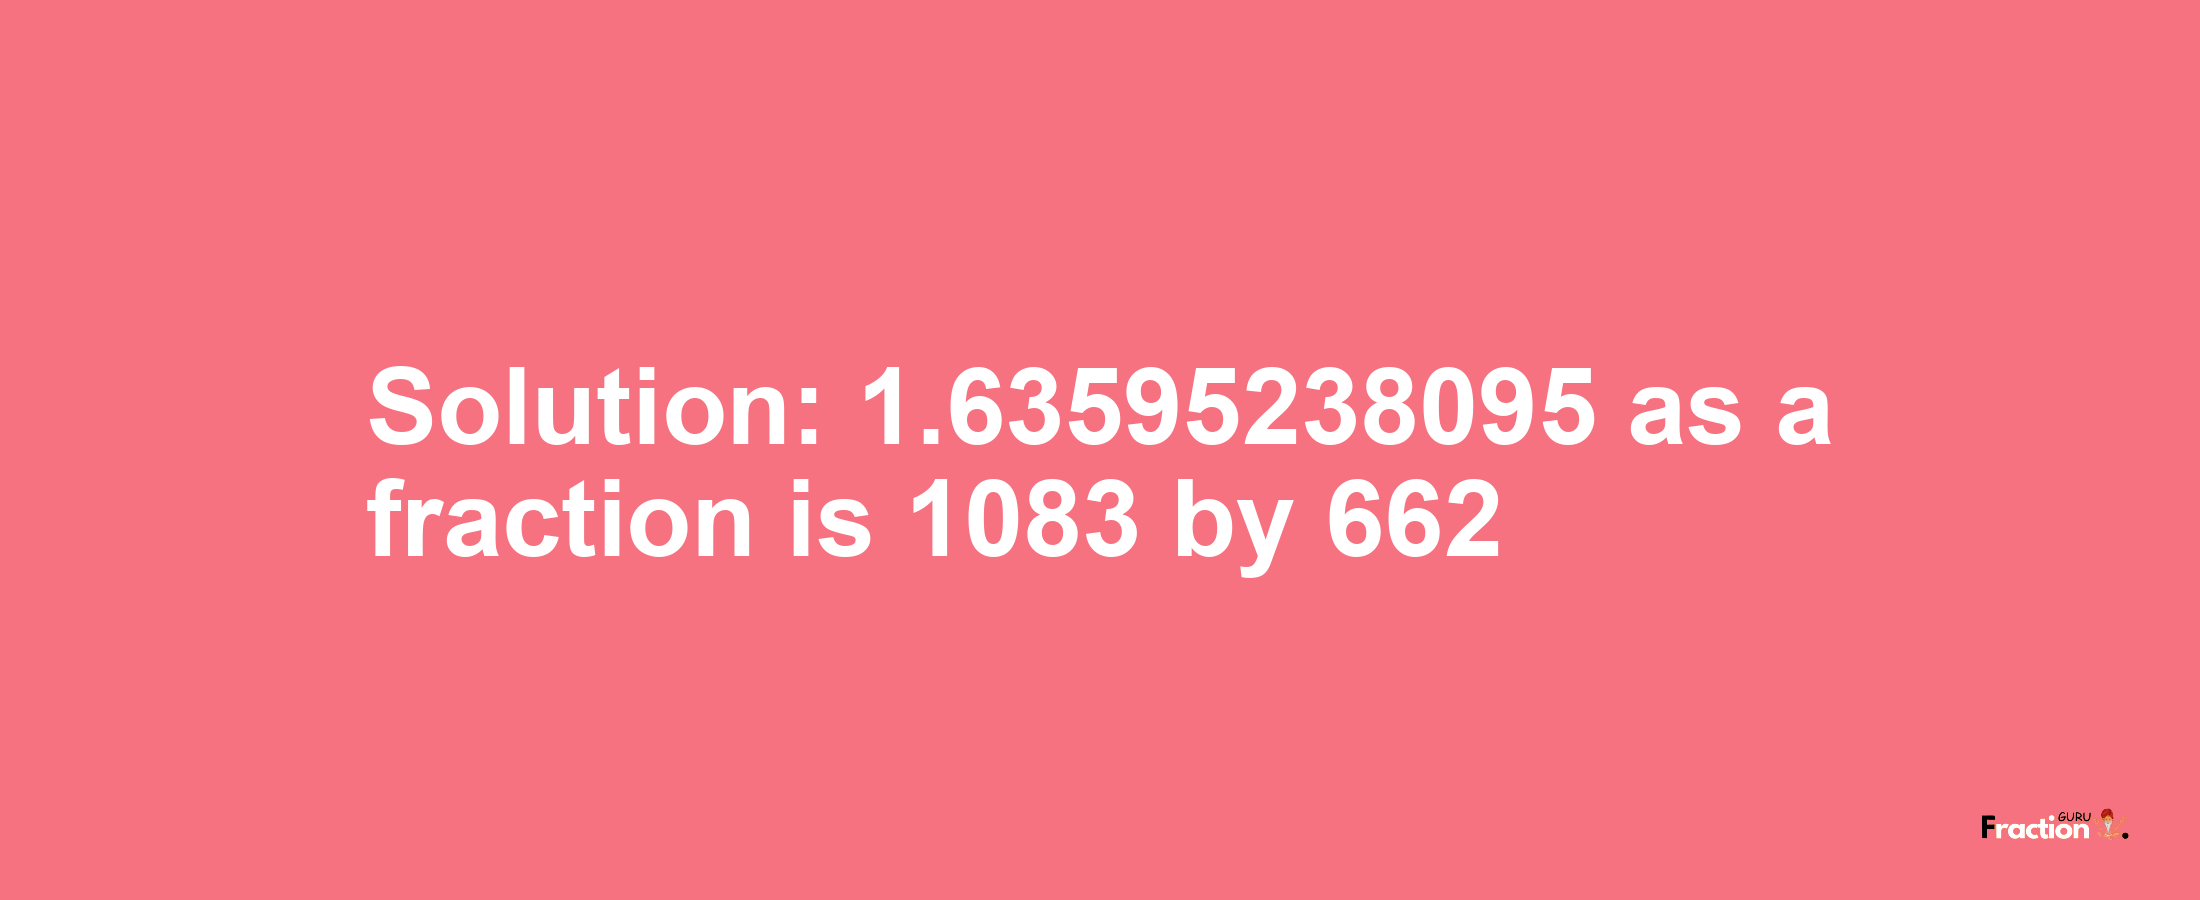 Solution:1.63595238095 as a fraction is 1083/662